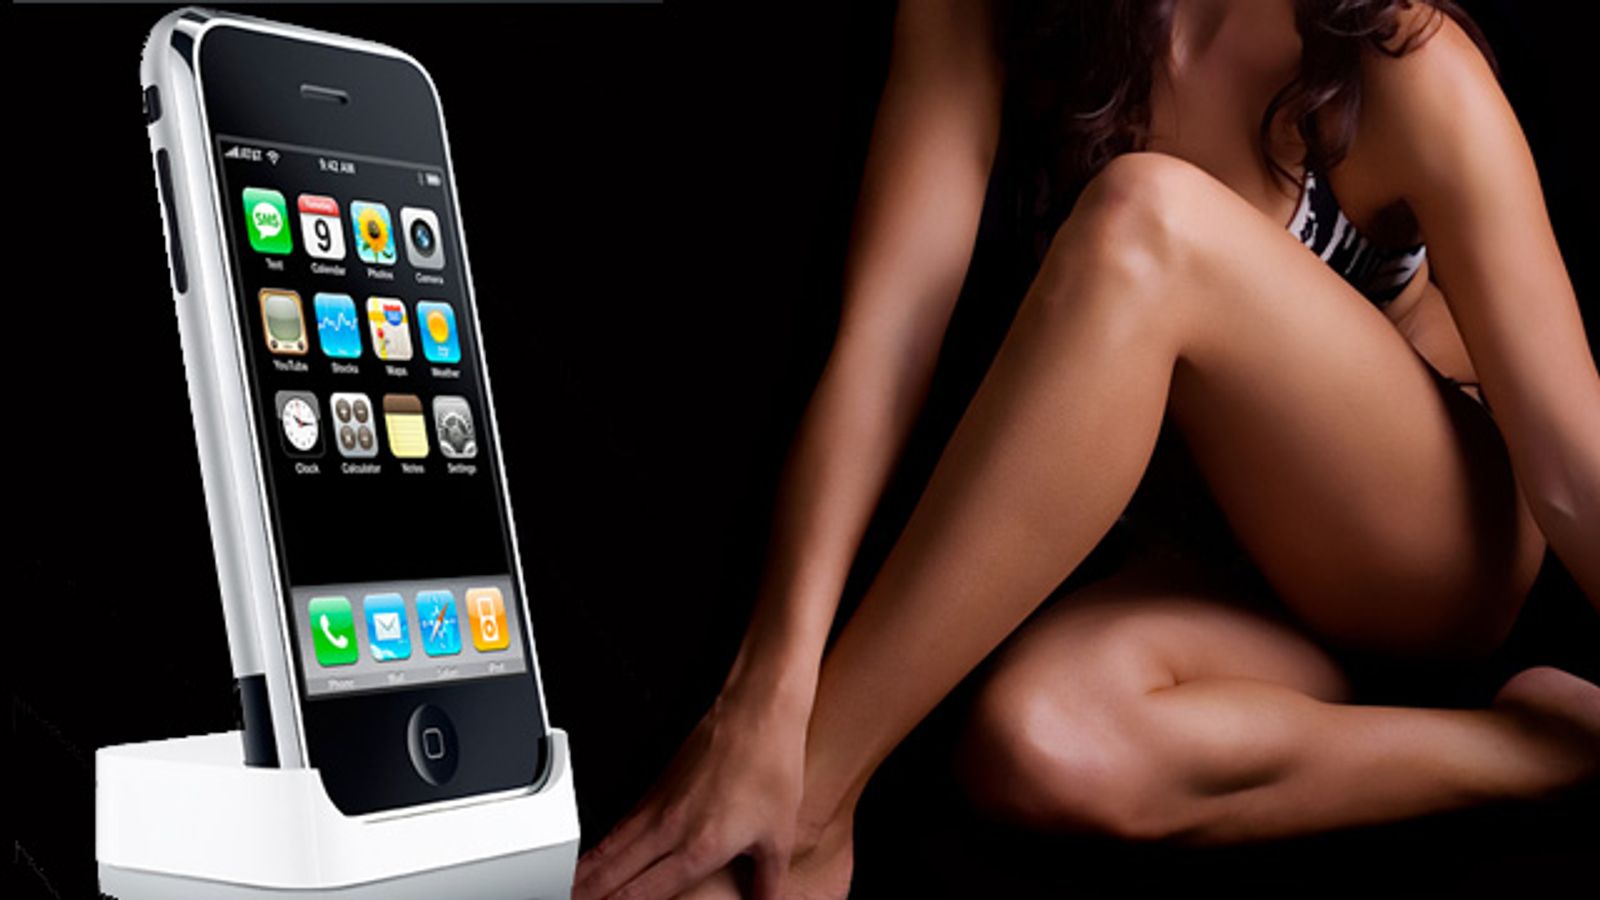 Retrevo: 20 Percent of iPhone Users Watch Porn on Device